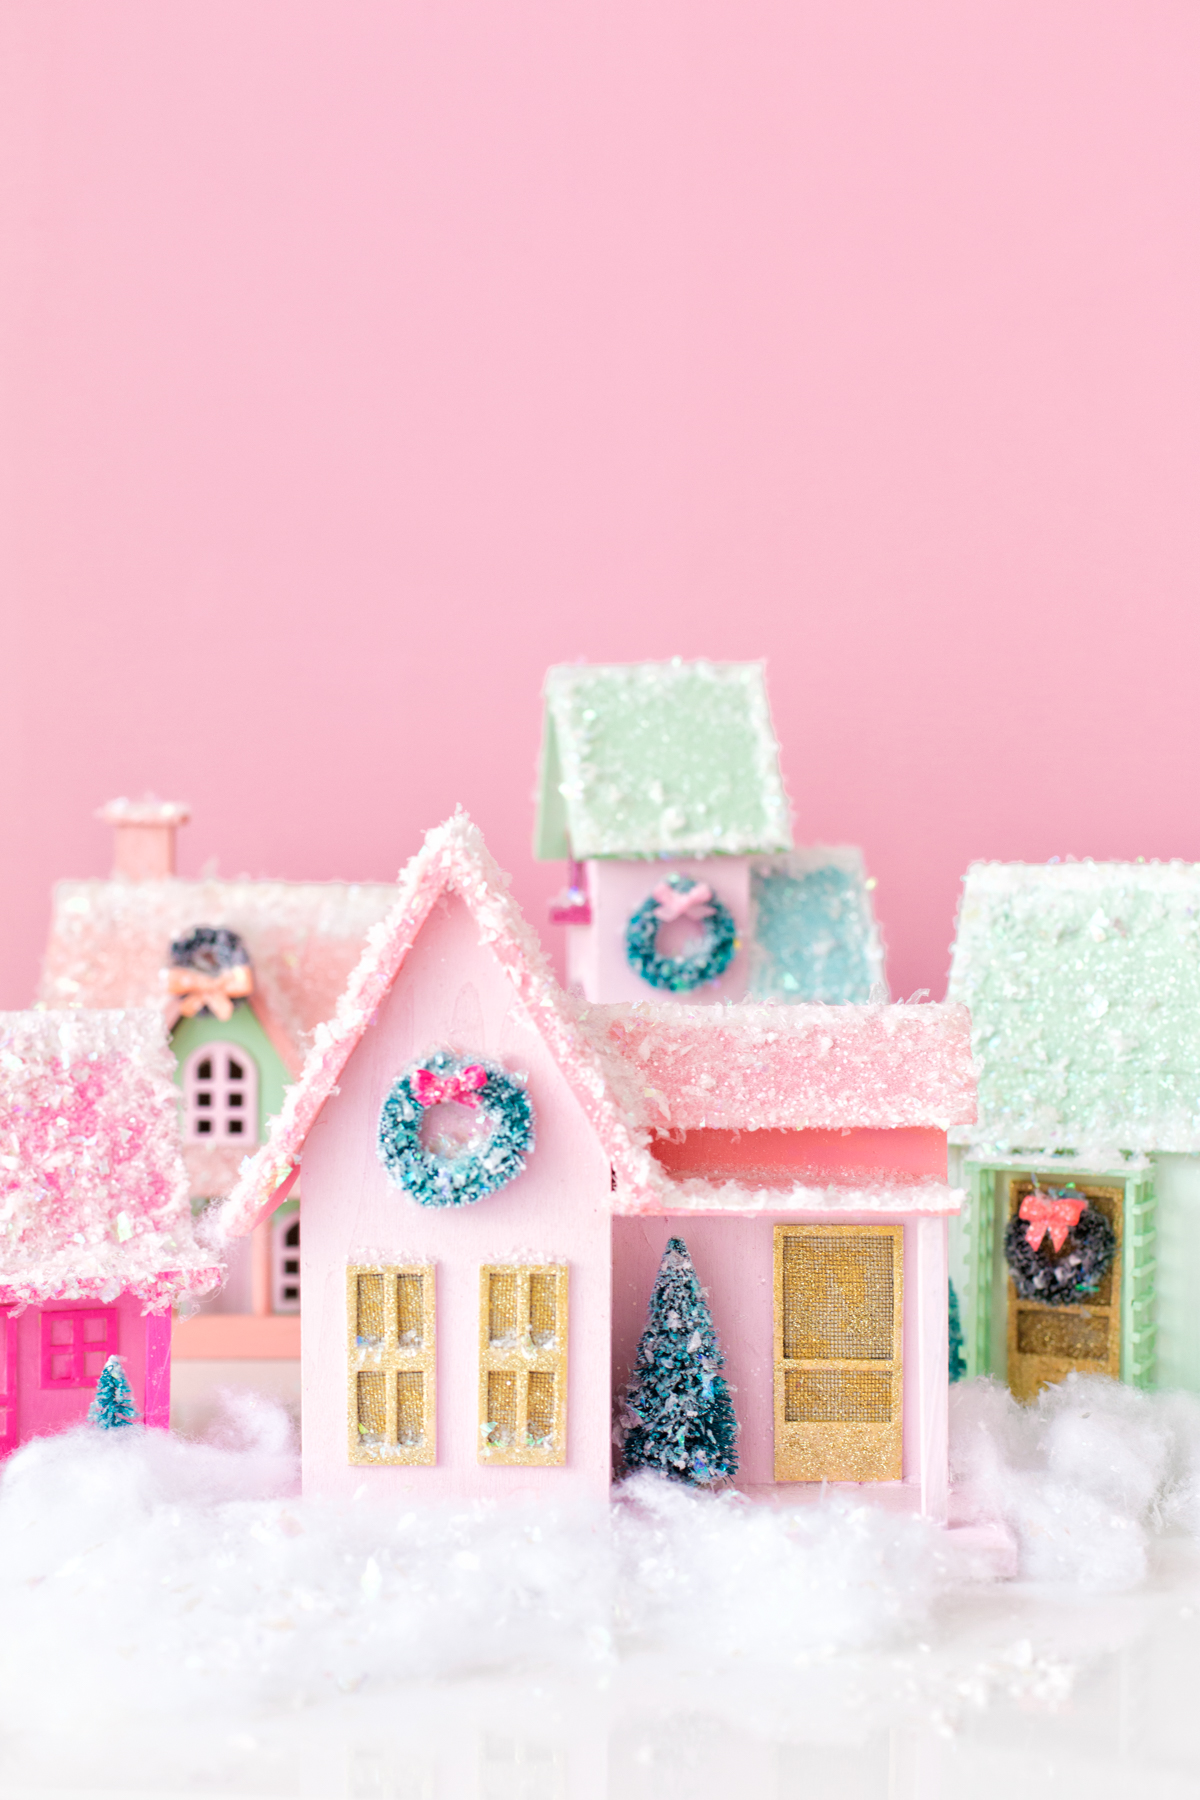 Painted and Glittered Christmas Village - Just Paint It Blog